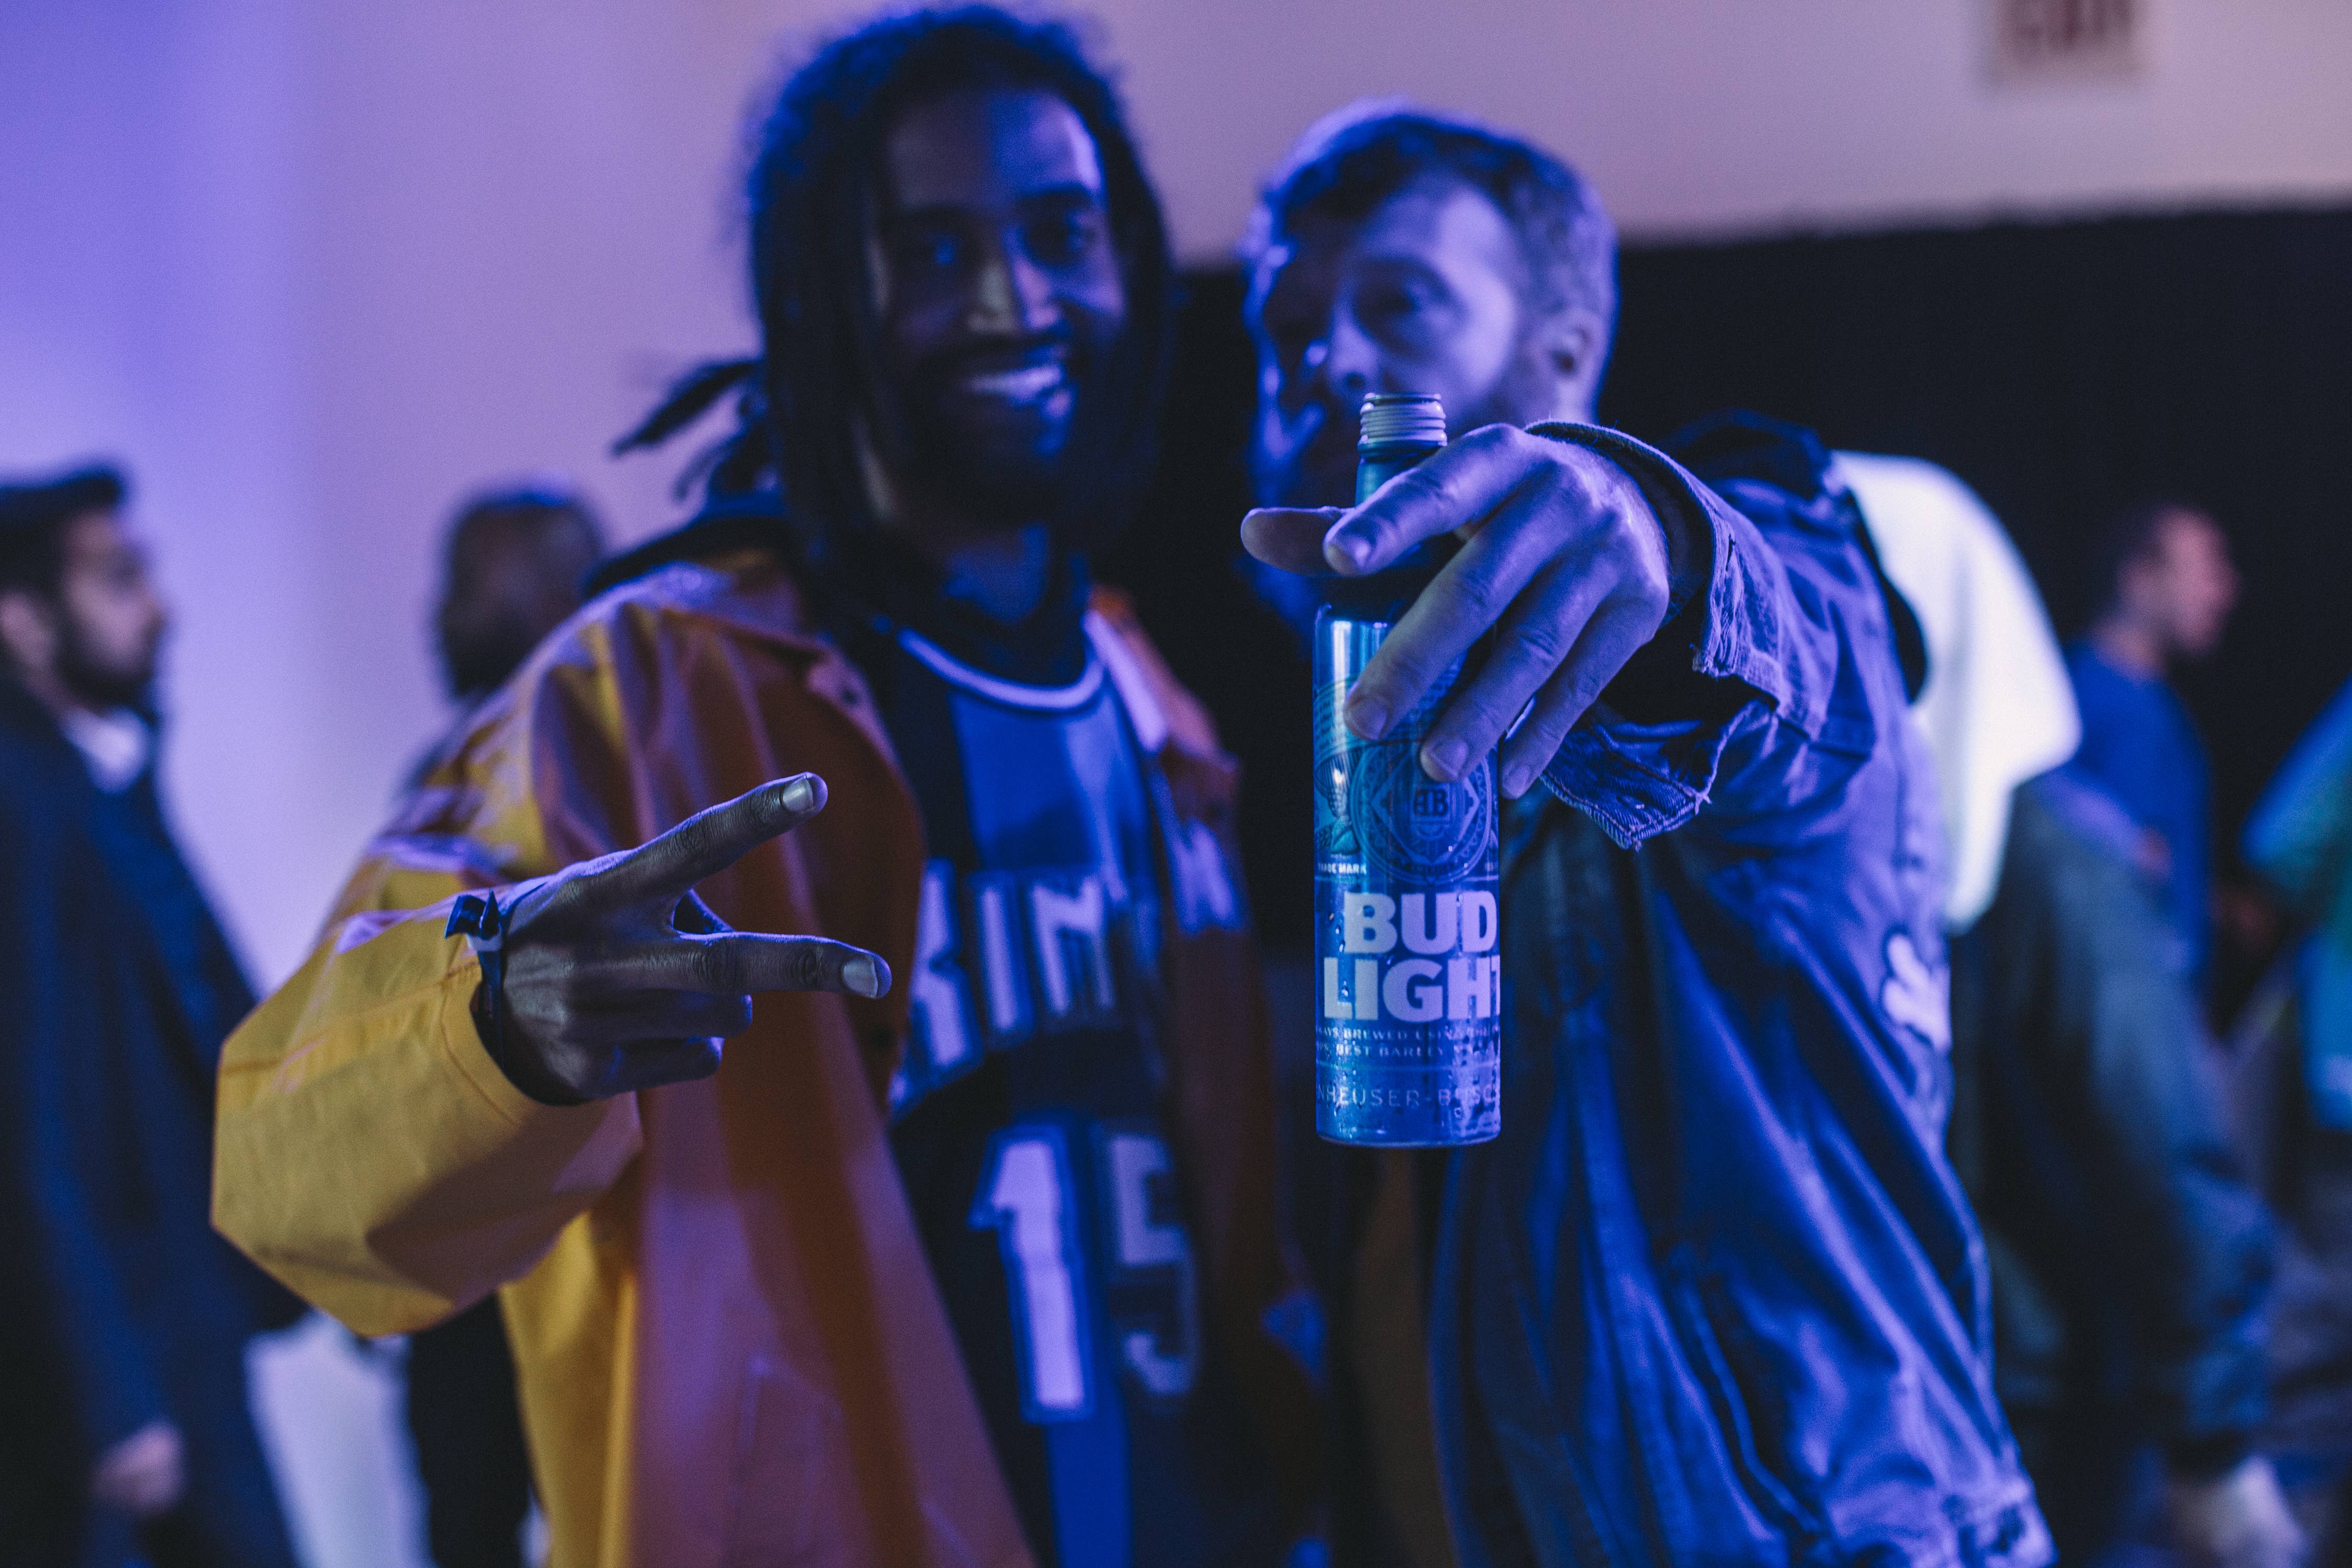 Russ Bengston at the NBA All Star 2017 Bud Light Crew HQ Party in New Orleans